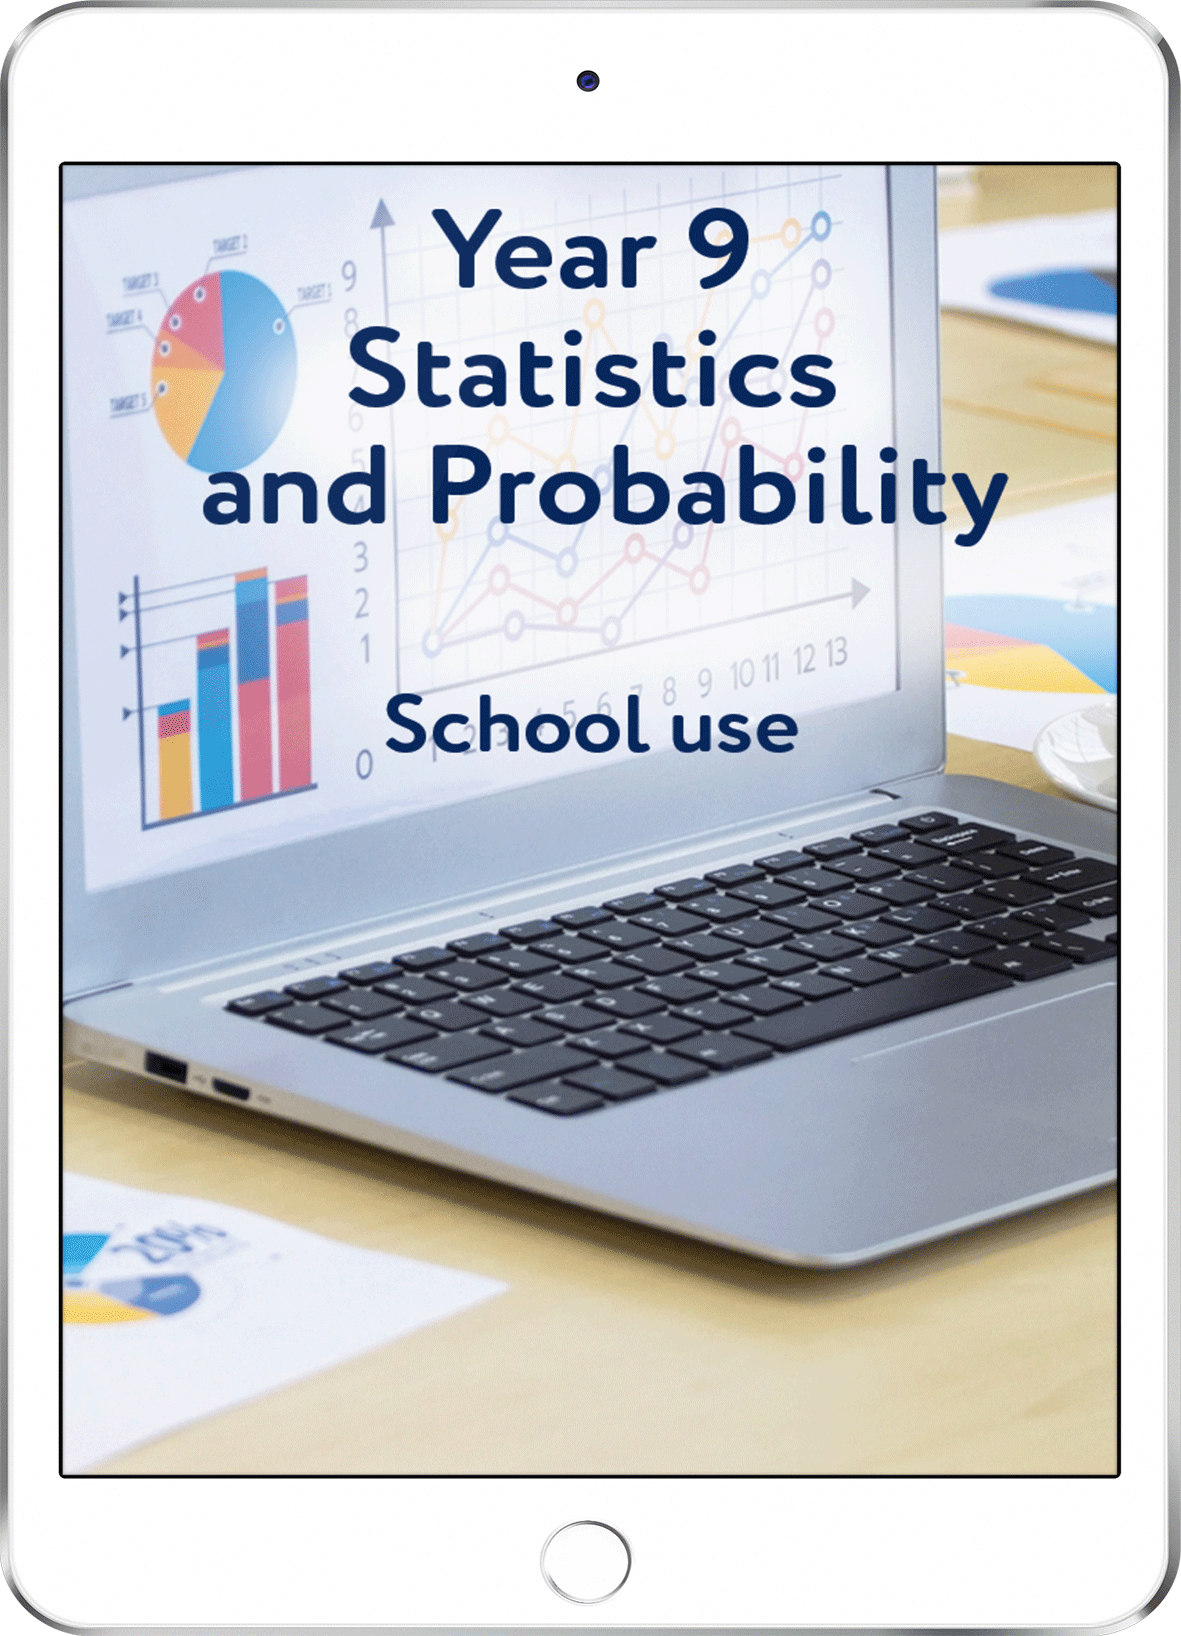 Year 9 Statistics and Probability - School Use